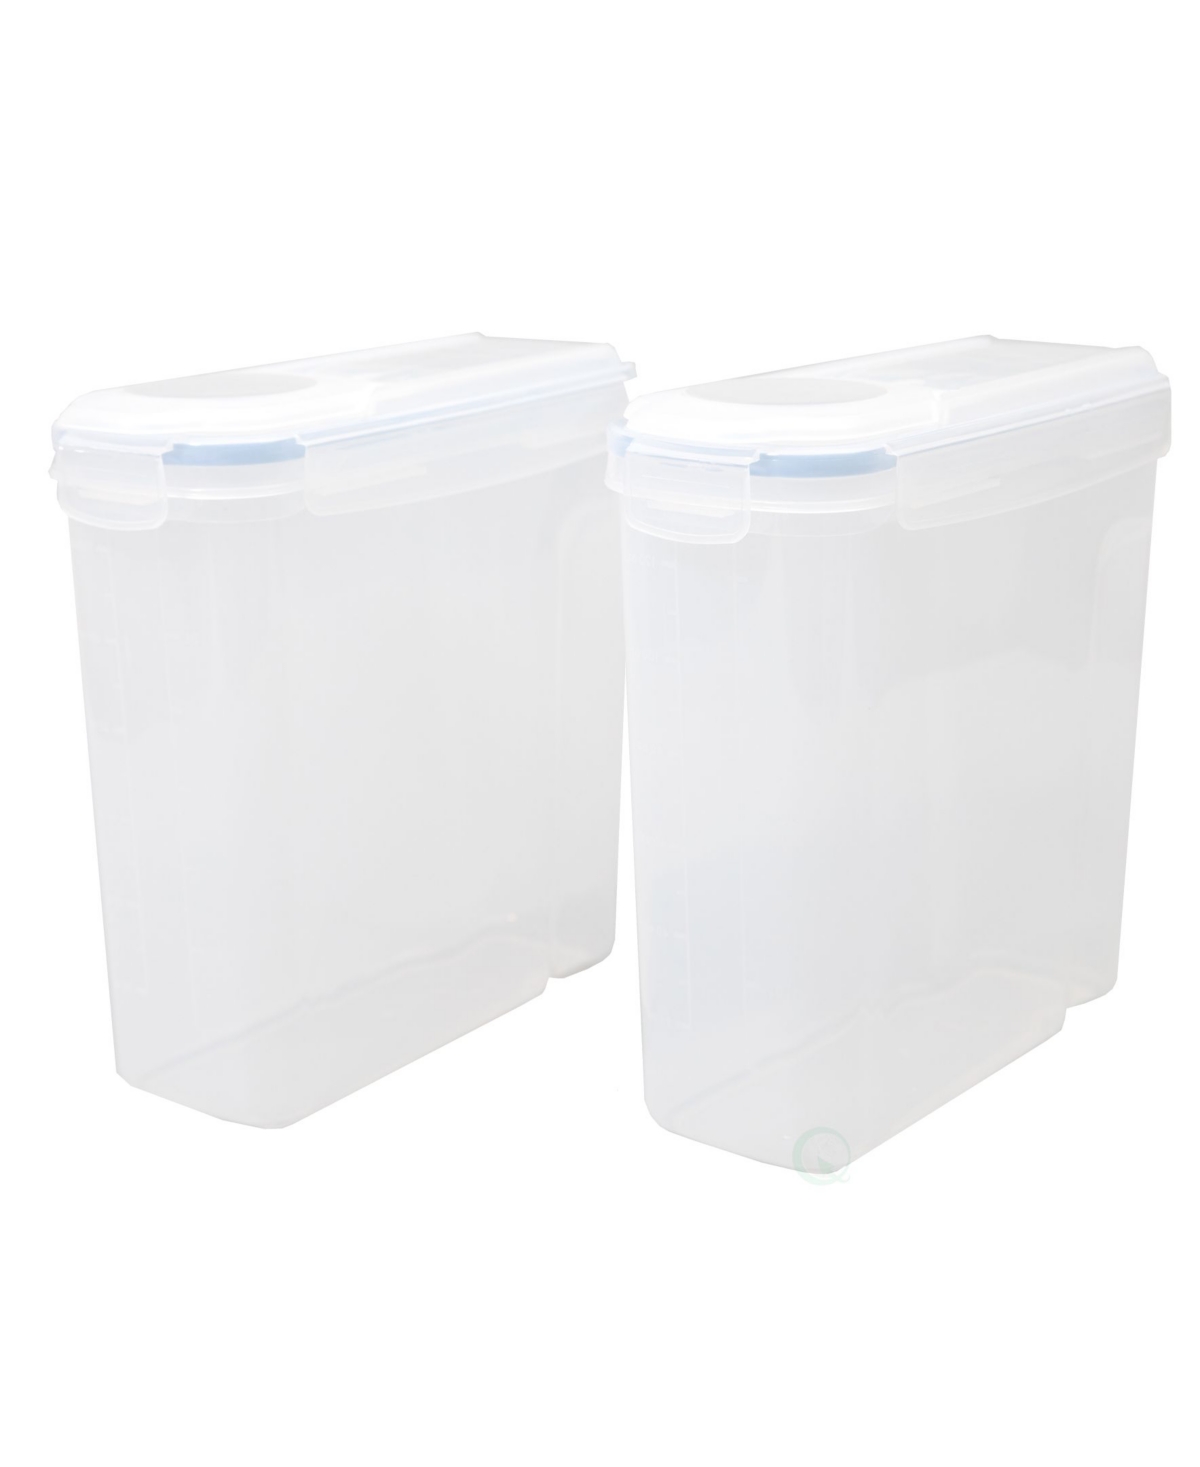 Vintiquewise Large Bpa-Free Plastic Food Cereal Containers, Airtight Spout Lid, Set of 2 - Natural